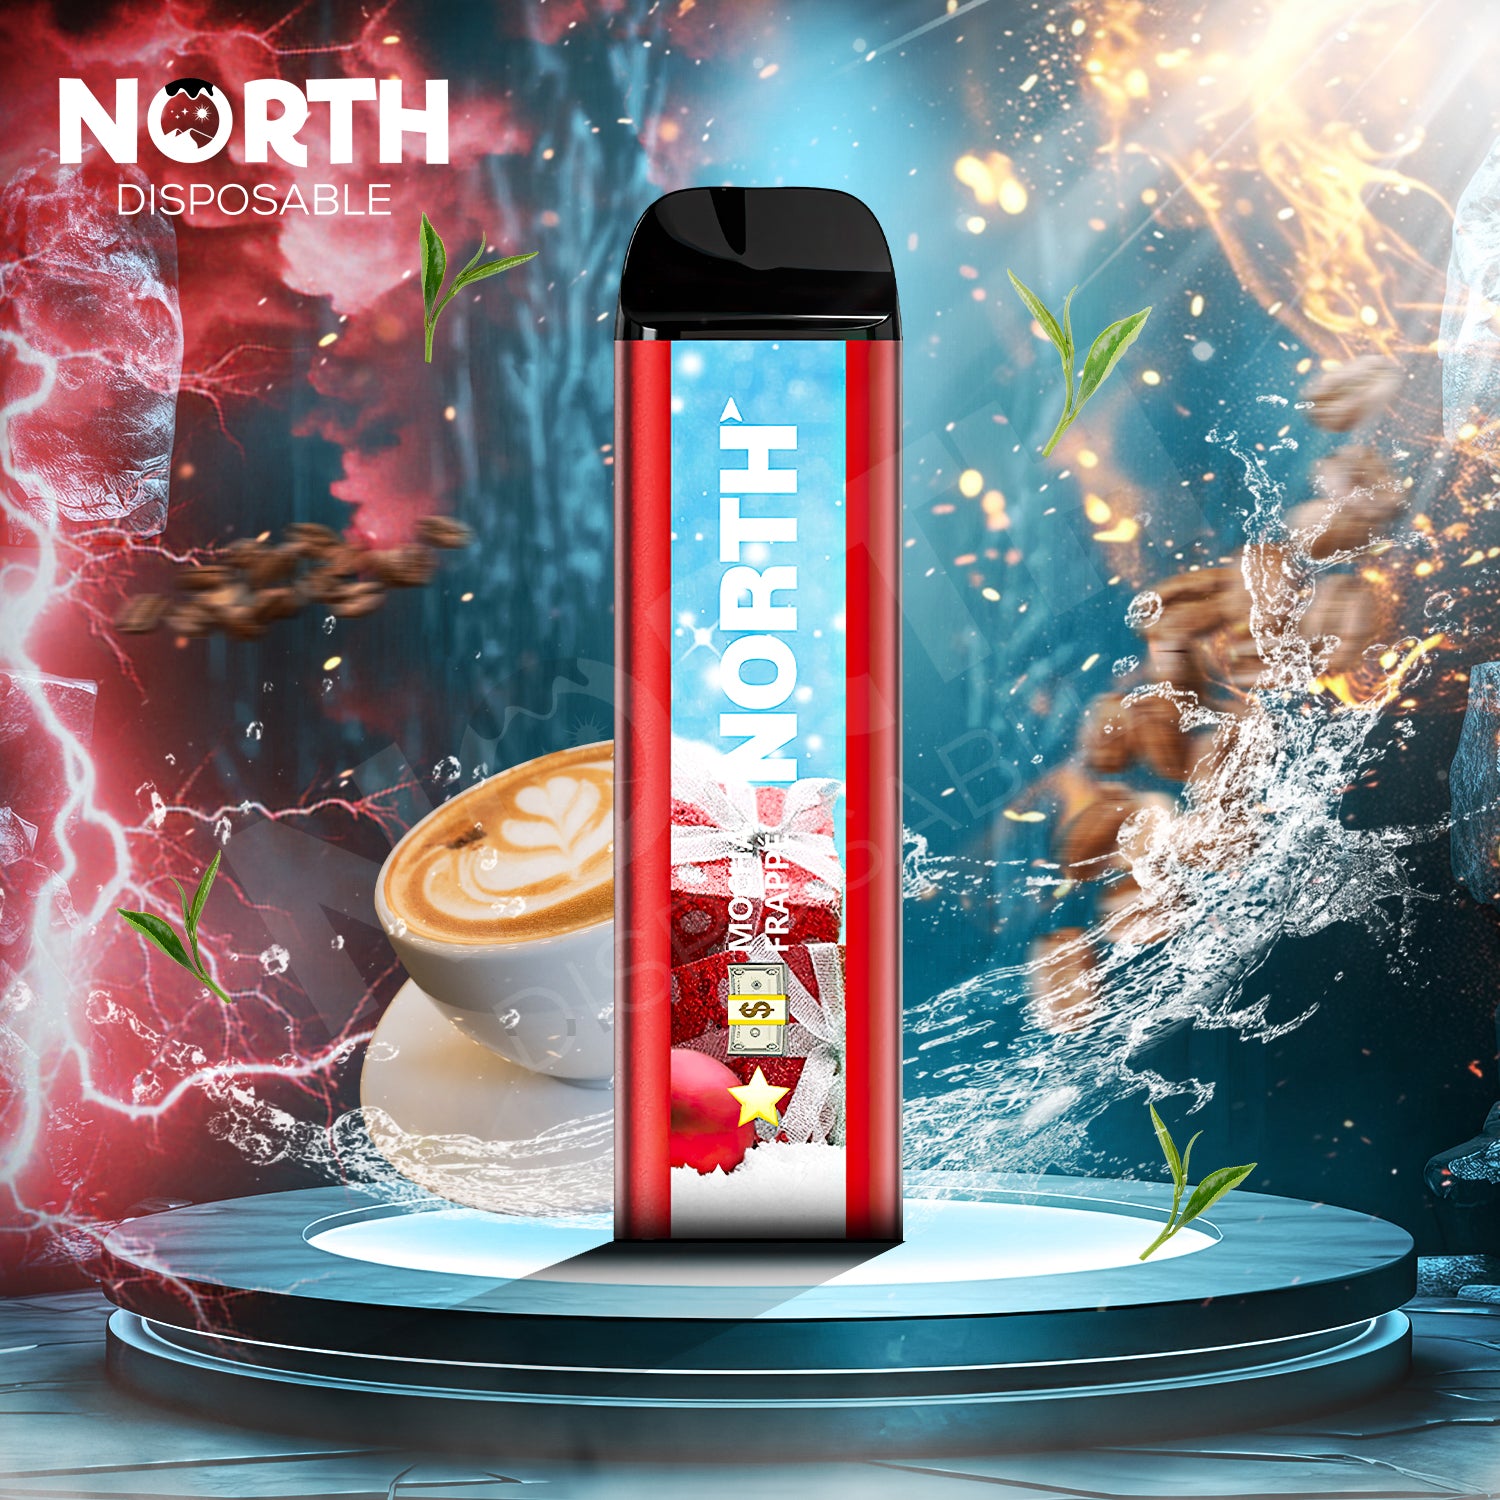 North 5000 Disposable -  Mocha Frappe (Holiday Edition)